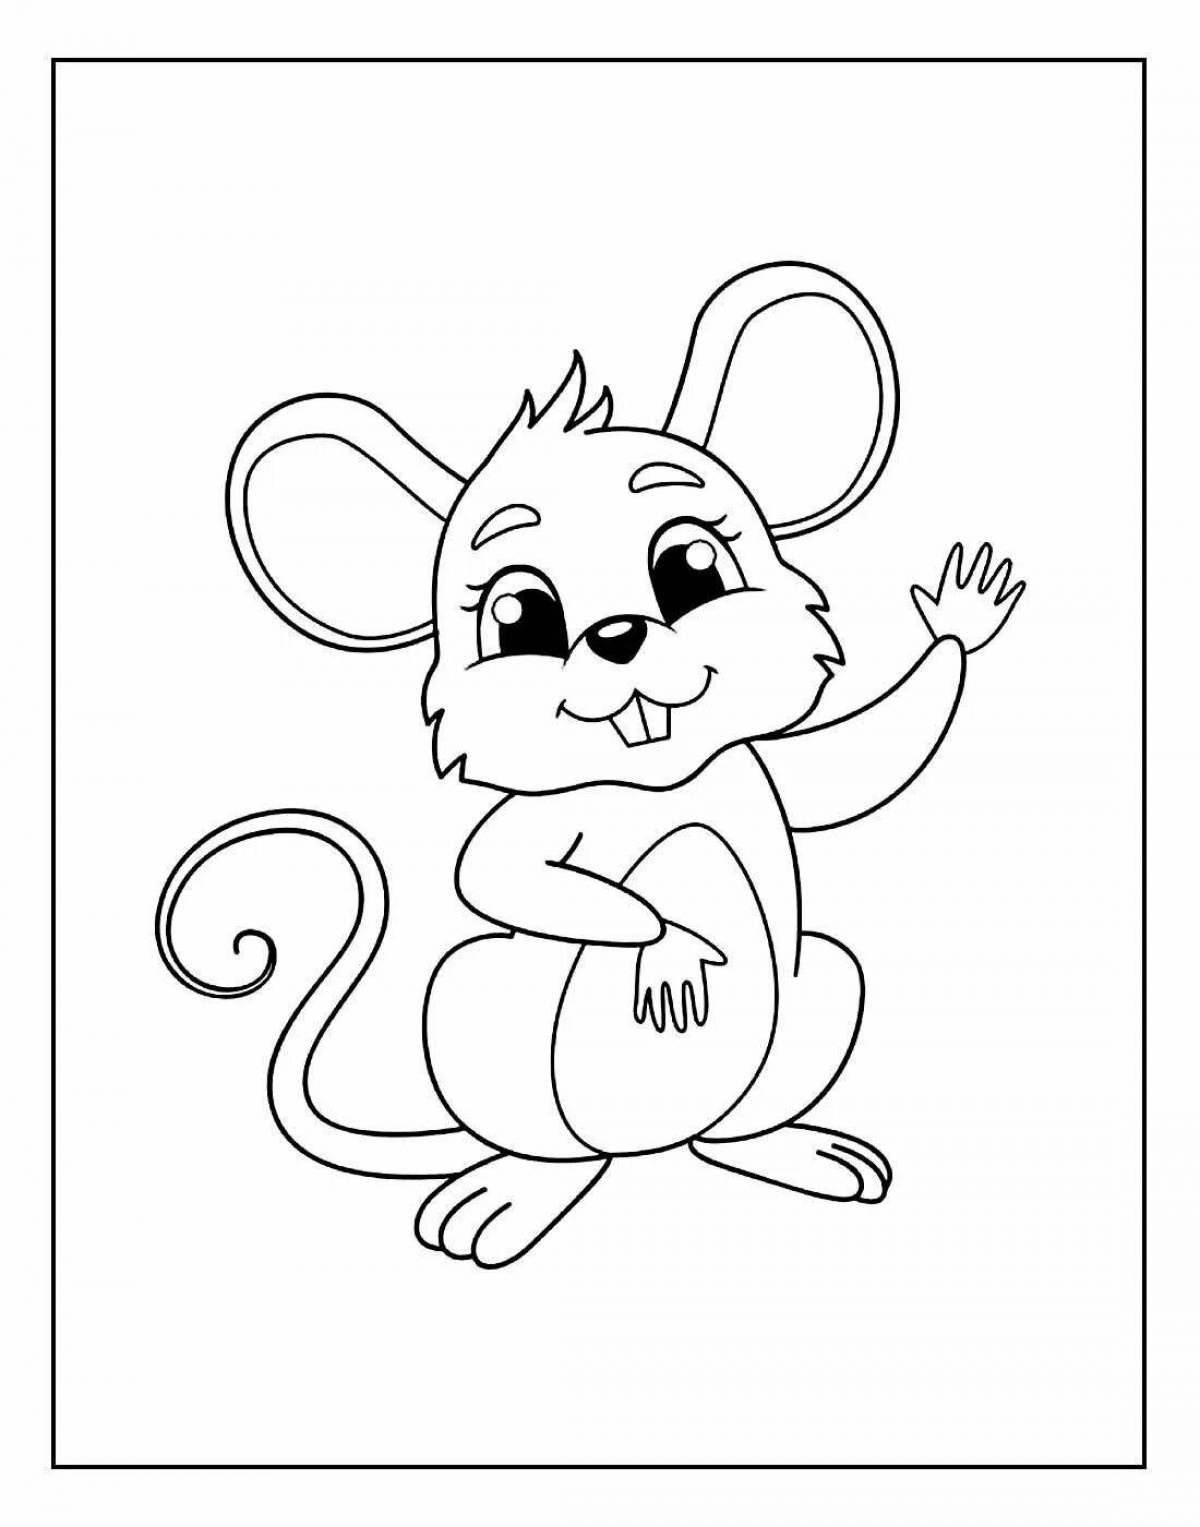 Splendid mouse coloring book for children 4-5 years old